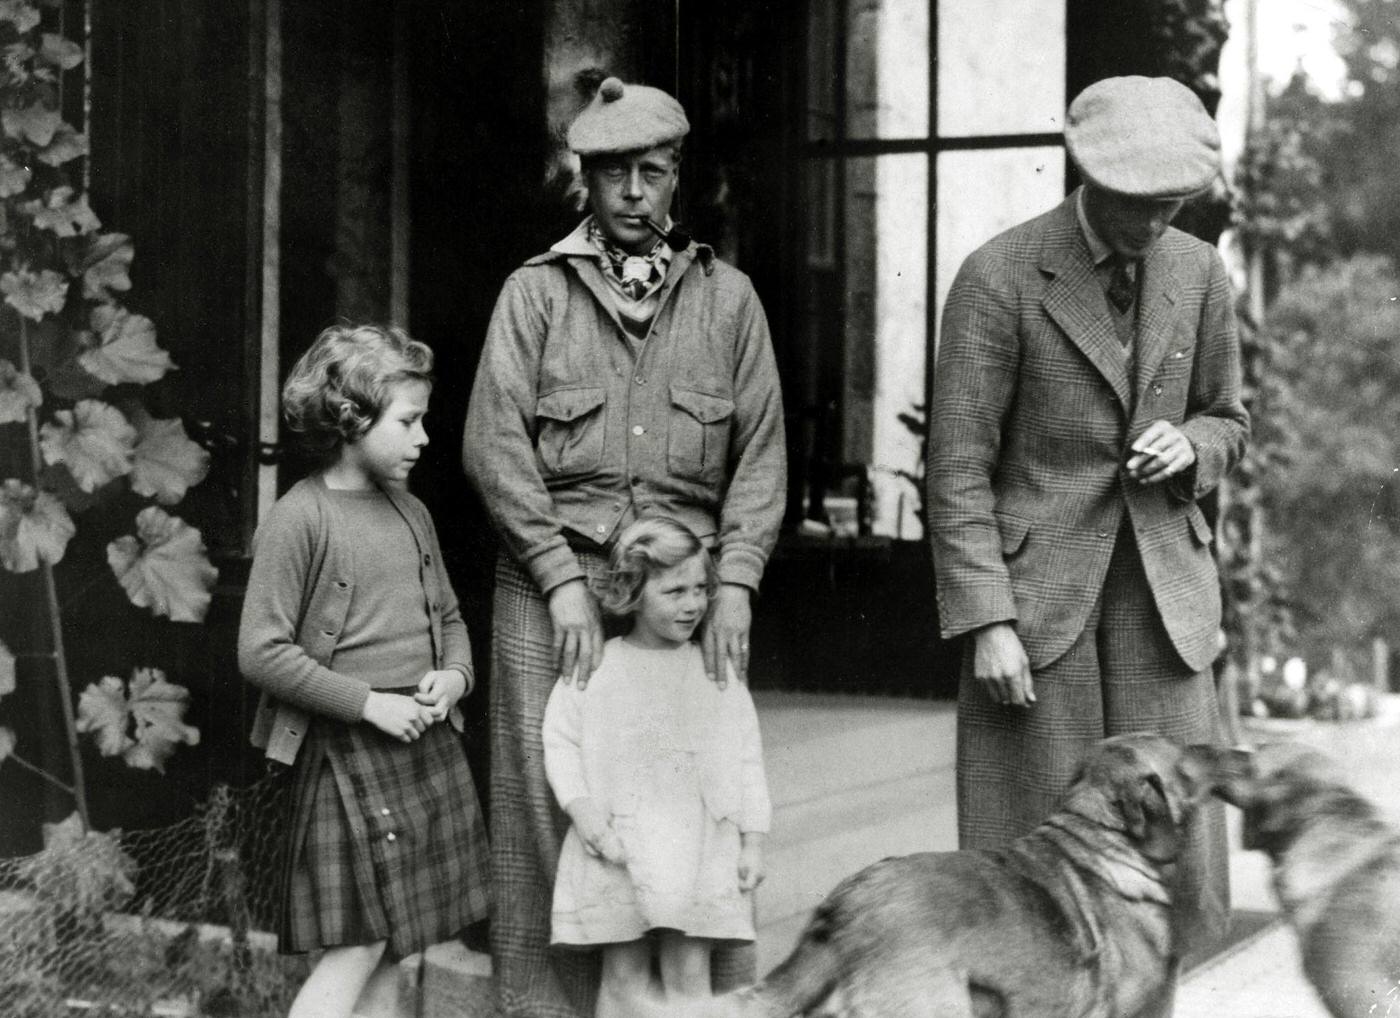 Edward, The Prince of Wales, with his brother the Duke of York and the Duke's children, Princess Elizabeth and Princess Margaret